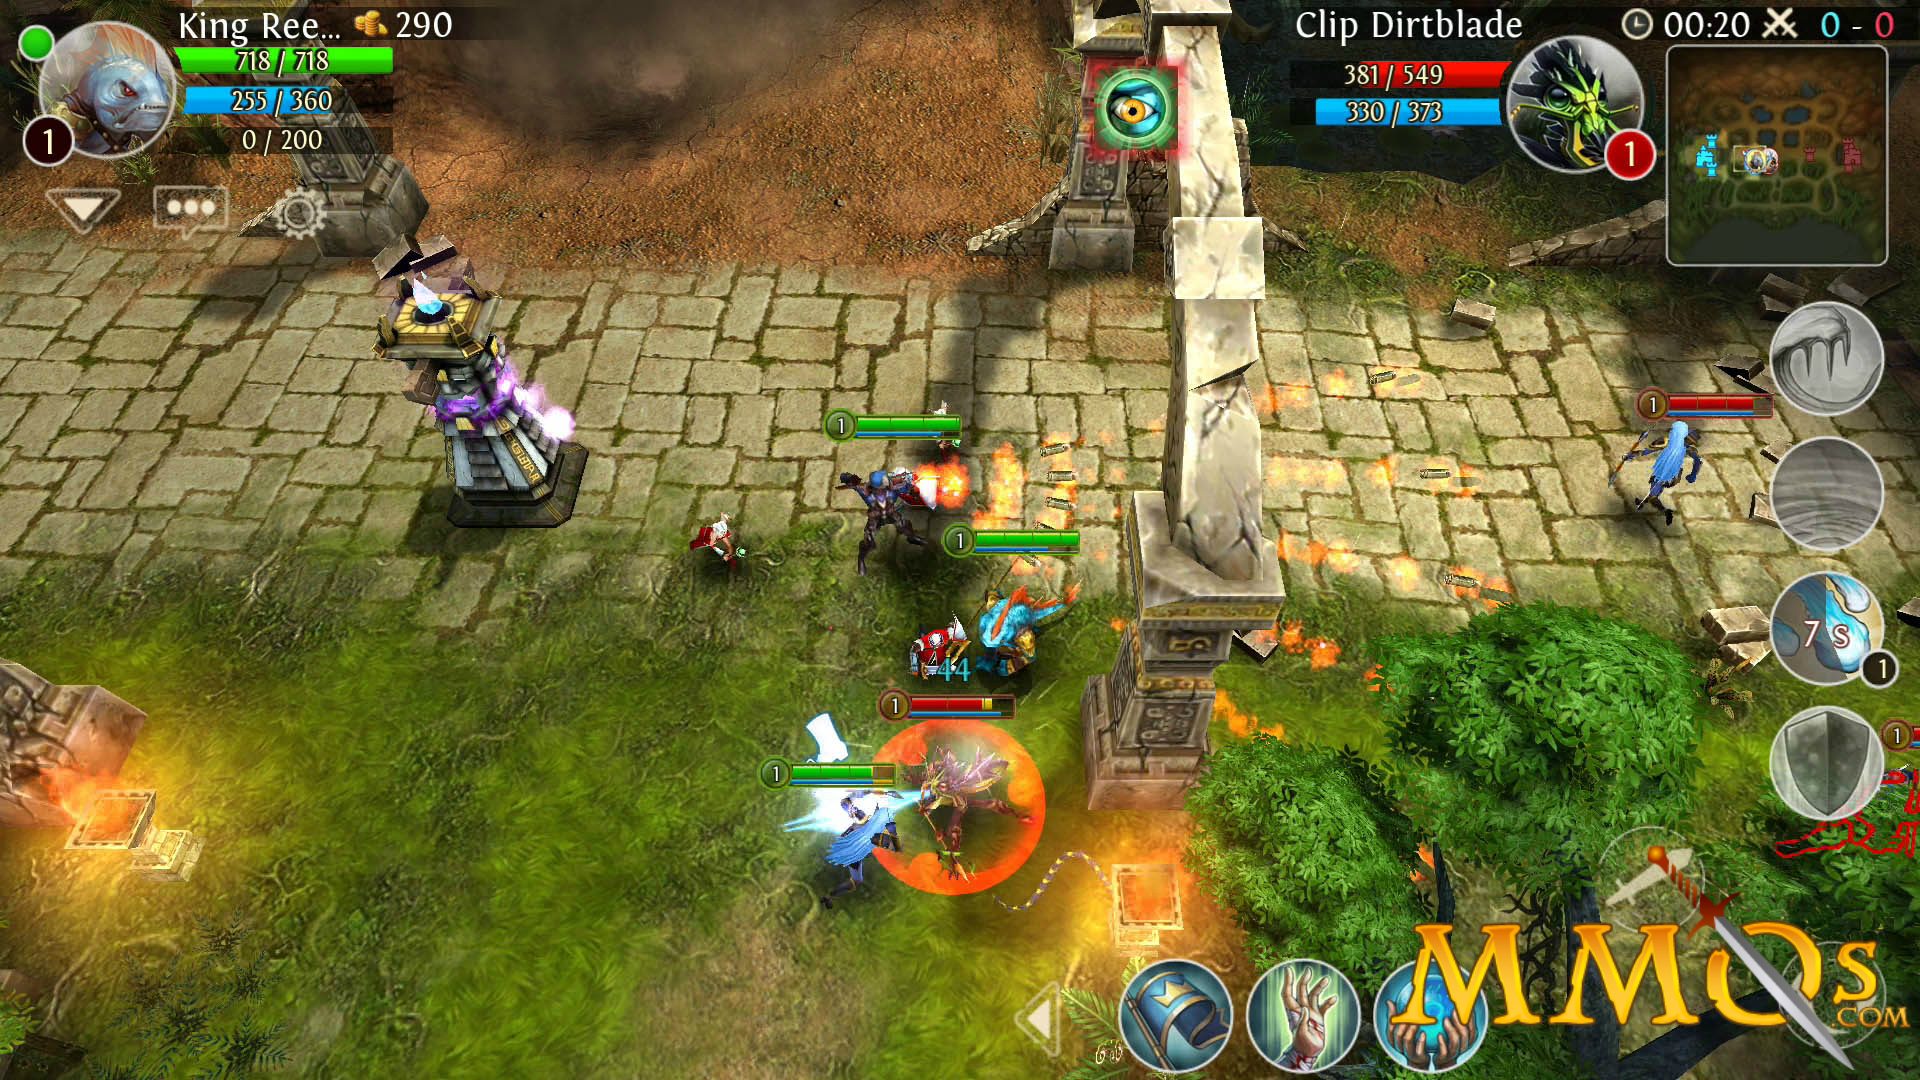 Telecharger heroes of order and chaos sur pc